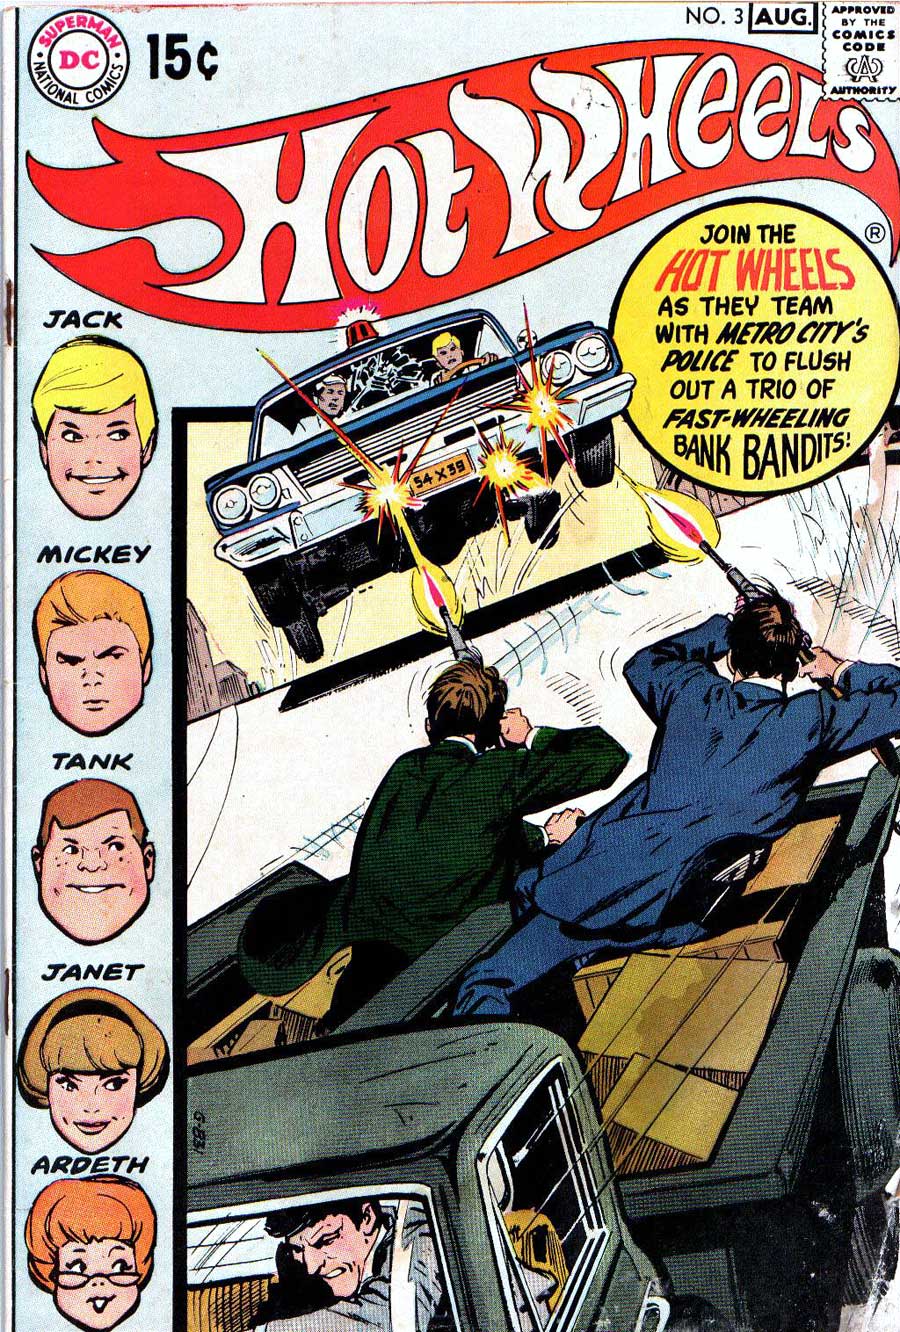 Hot Wheels v1 #3 dc 1970s bronze age comic book cover art by Neal Adams